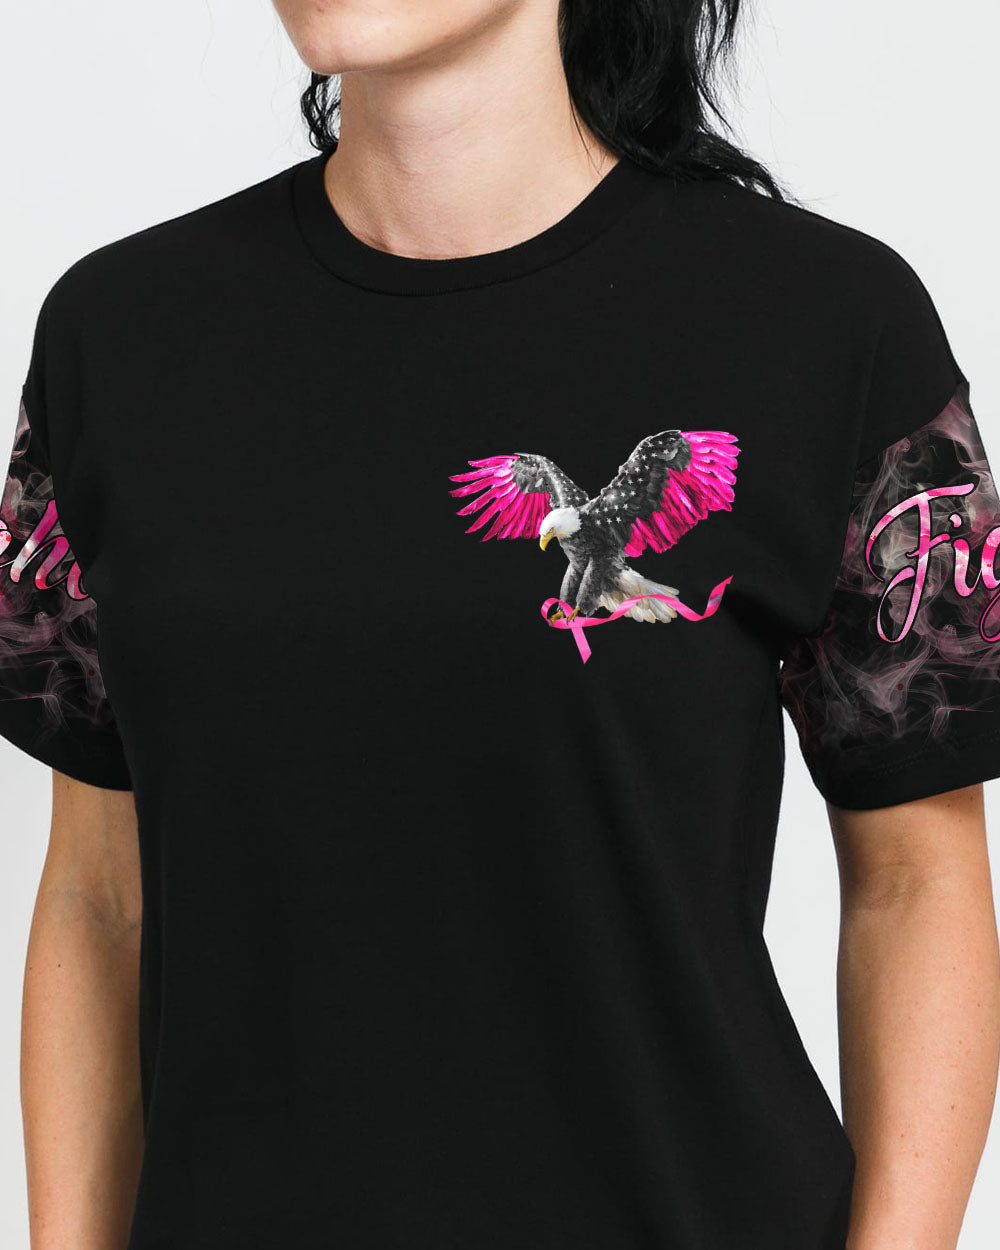 Be Stronger Than The Storm Eagle Pink Smoke Women's Breast Cancer Awareness Tshirt